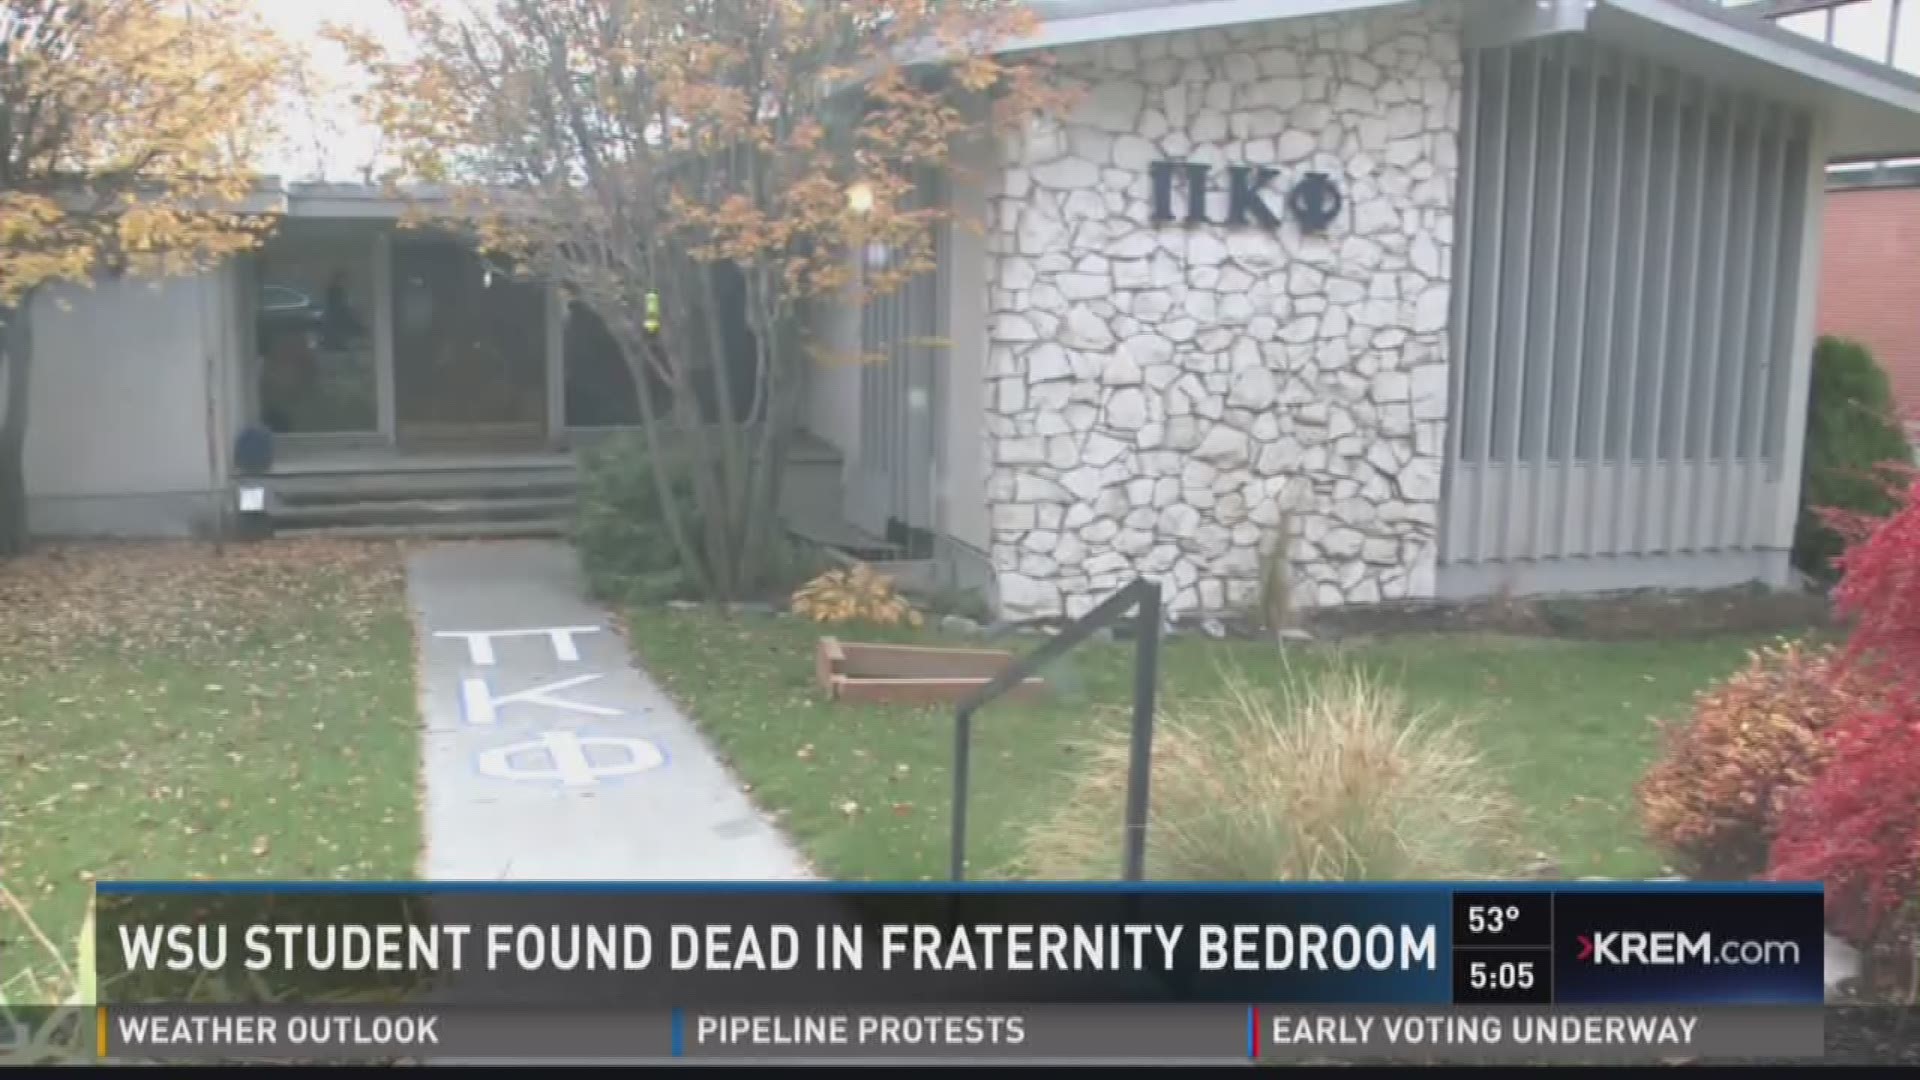 Early Monday morning, a WSU student was found dead in his bedroom inside a fraternity house. KREM 2's Alexa Block speaks to students as they react to the loss of one of their classmates. (10/24/16 at 5 p.m.)